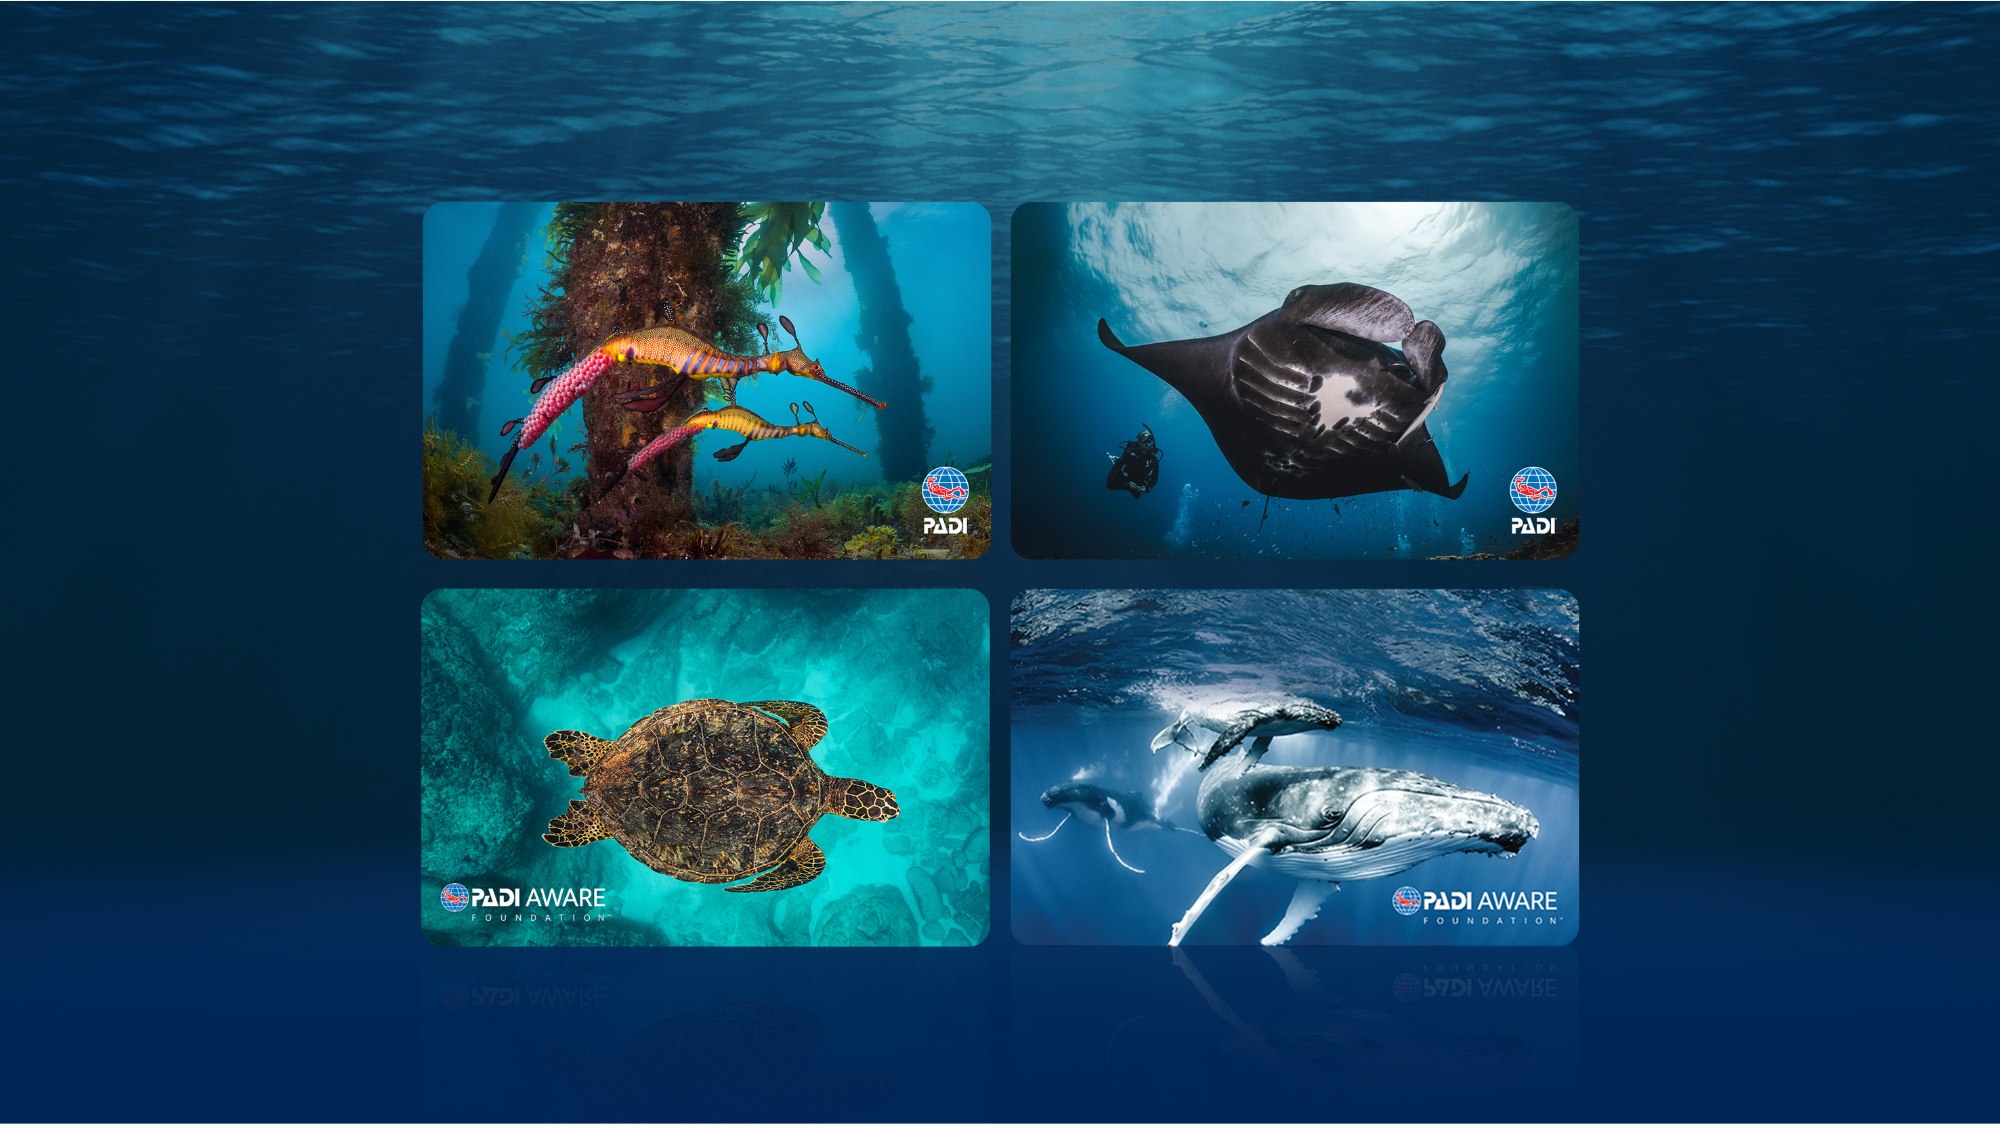 Four of the marine life designs available when ordering a PADI card replacement, including seadragon, turtle, whale, and ray